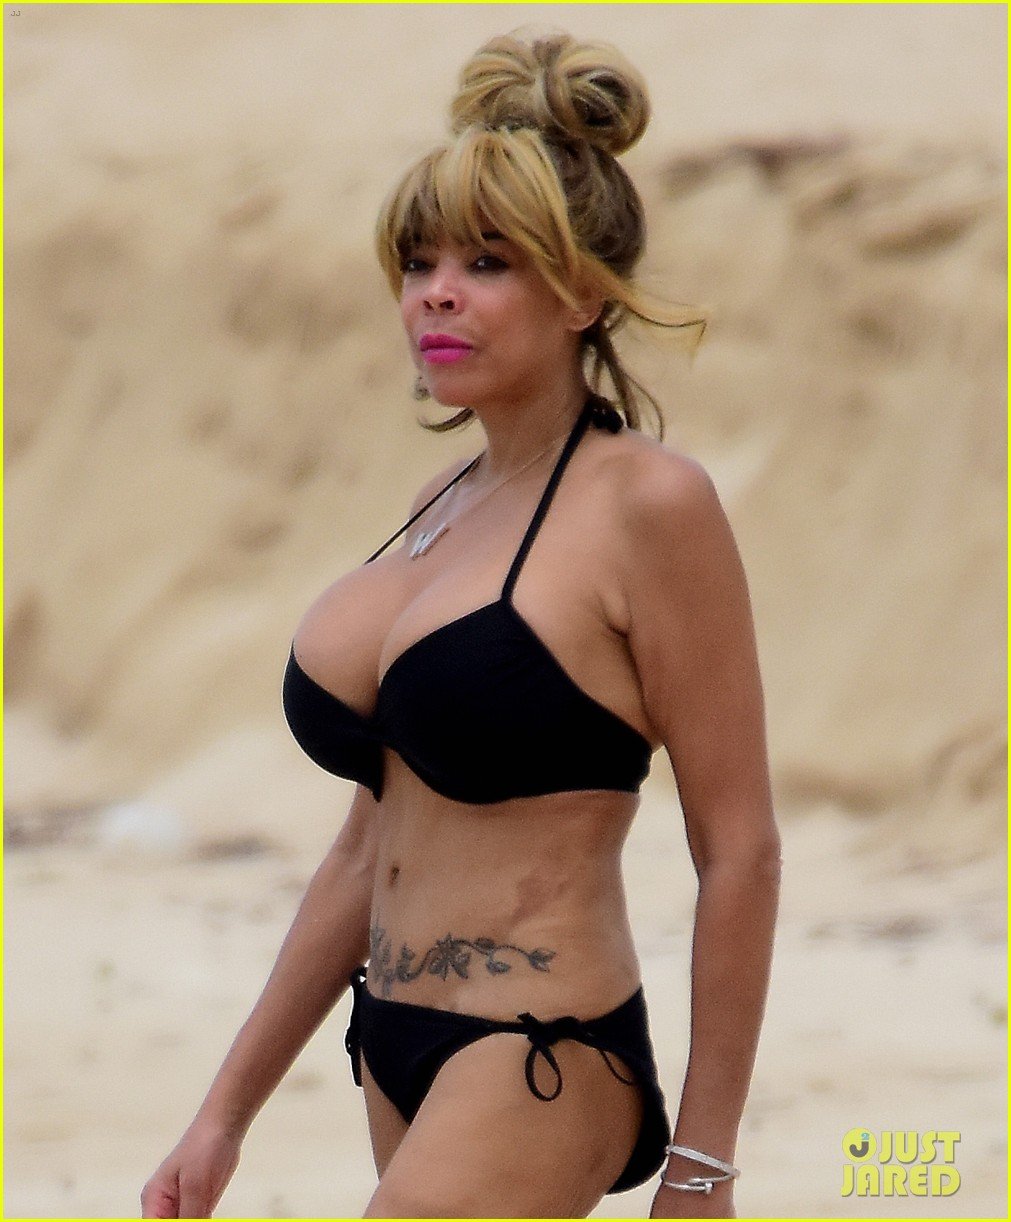 Best of Wendy williams topless pics